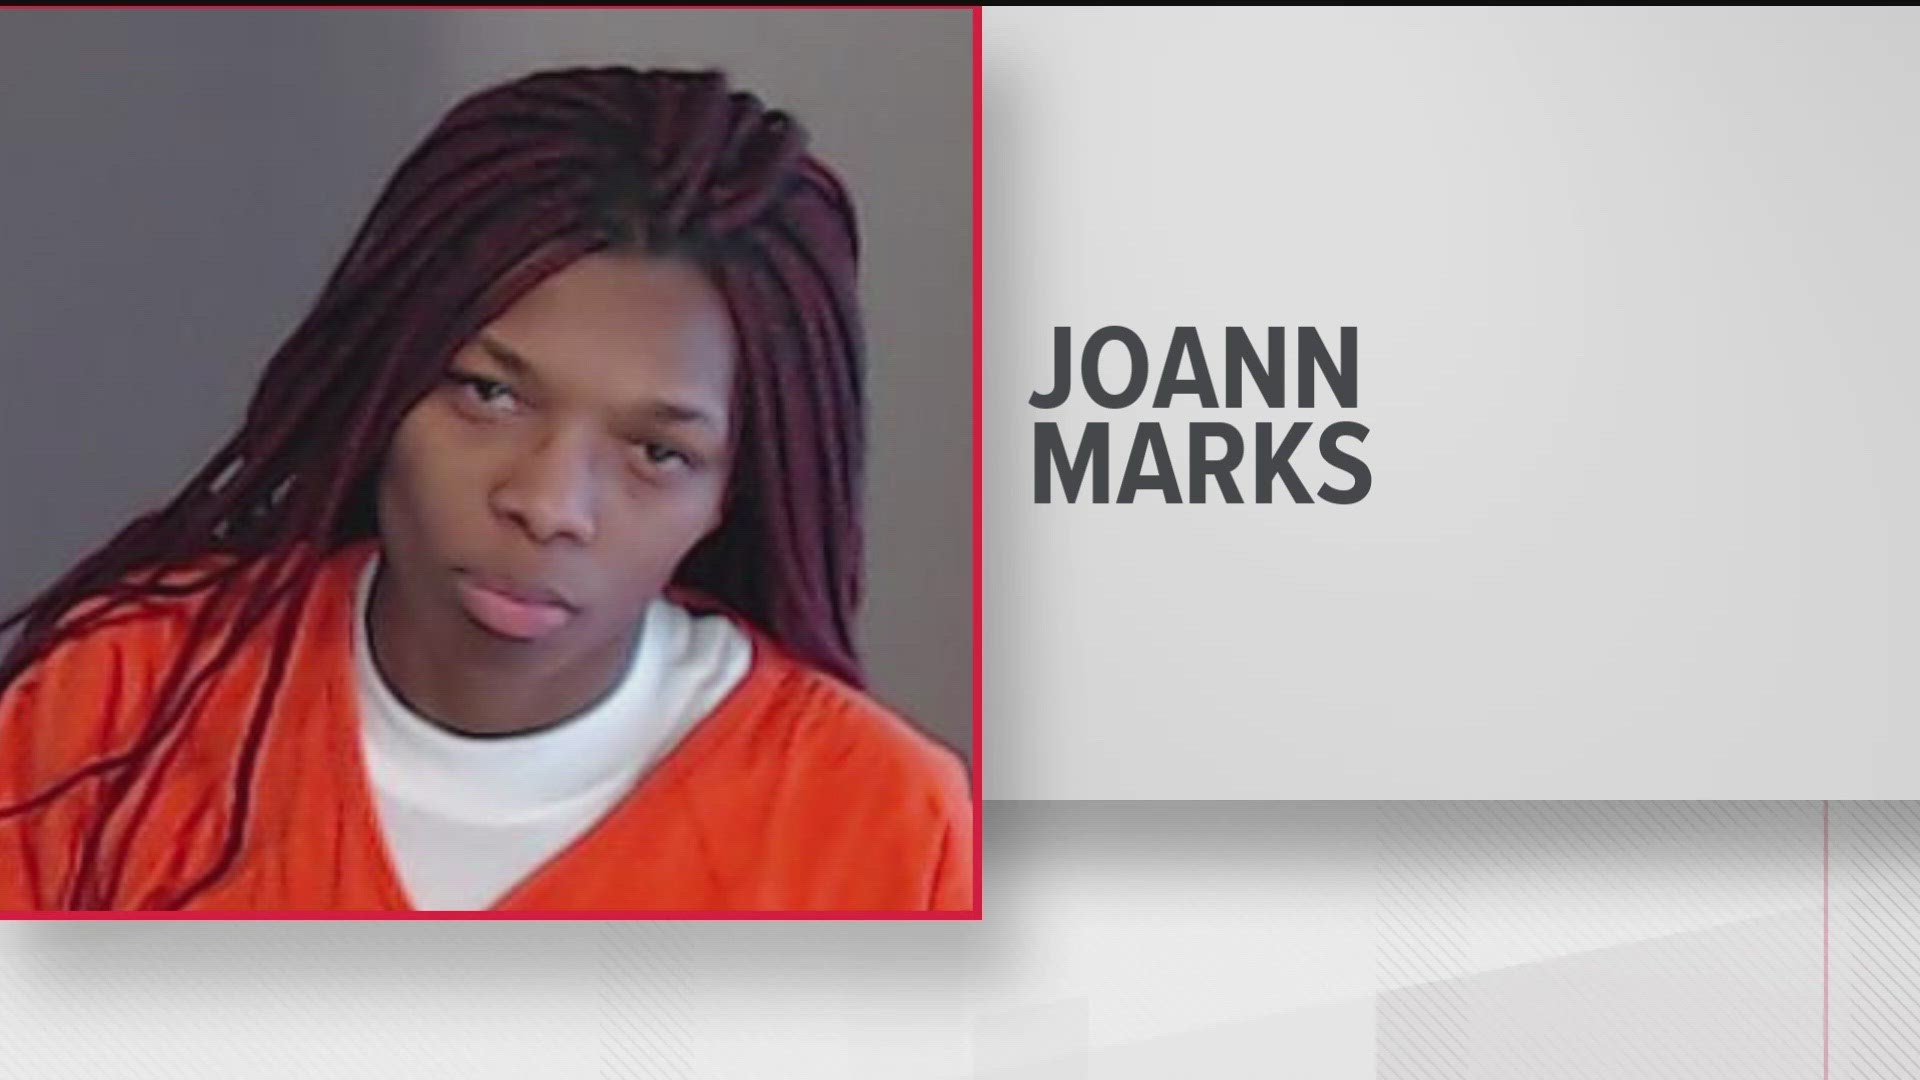 26-year-old Joann Marks was taken into custody Friday on felony charges.